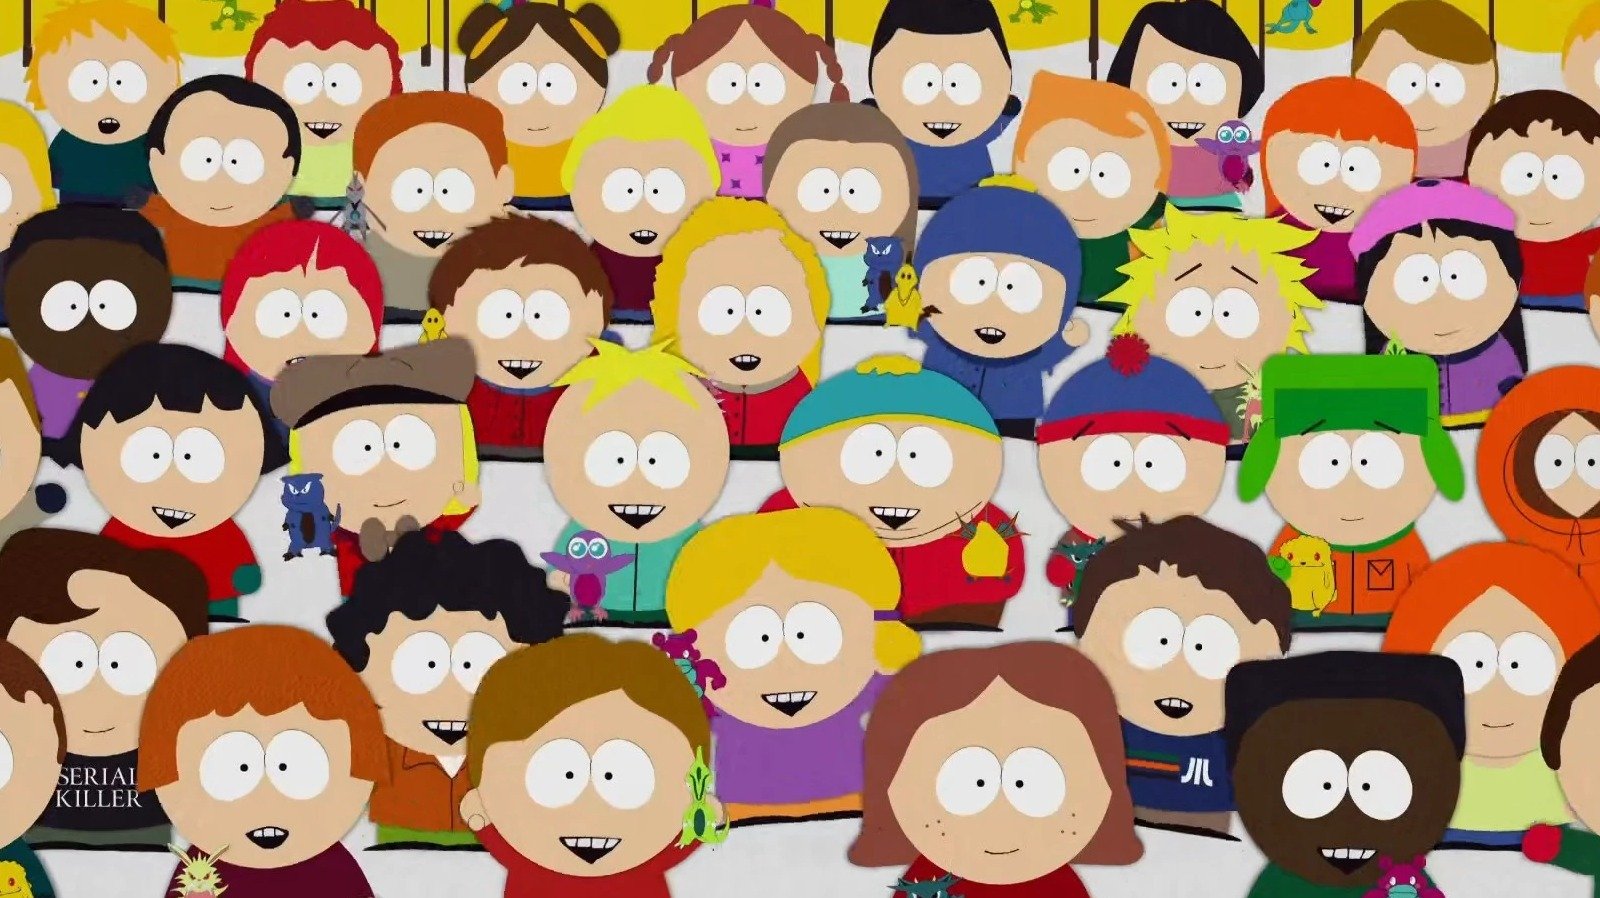 The 18 South Park Episodes That Got Banned (& One That Should Be)